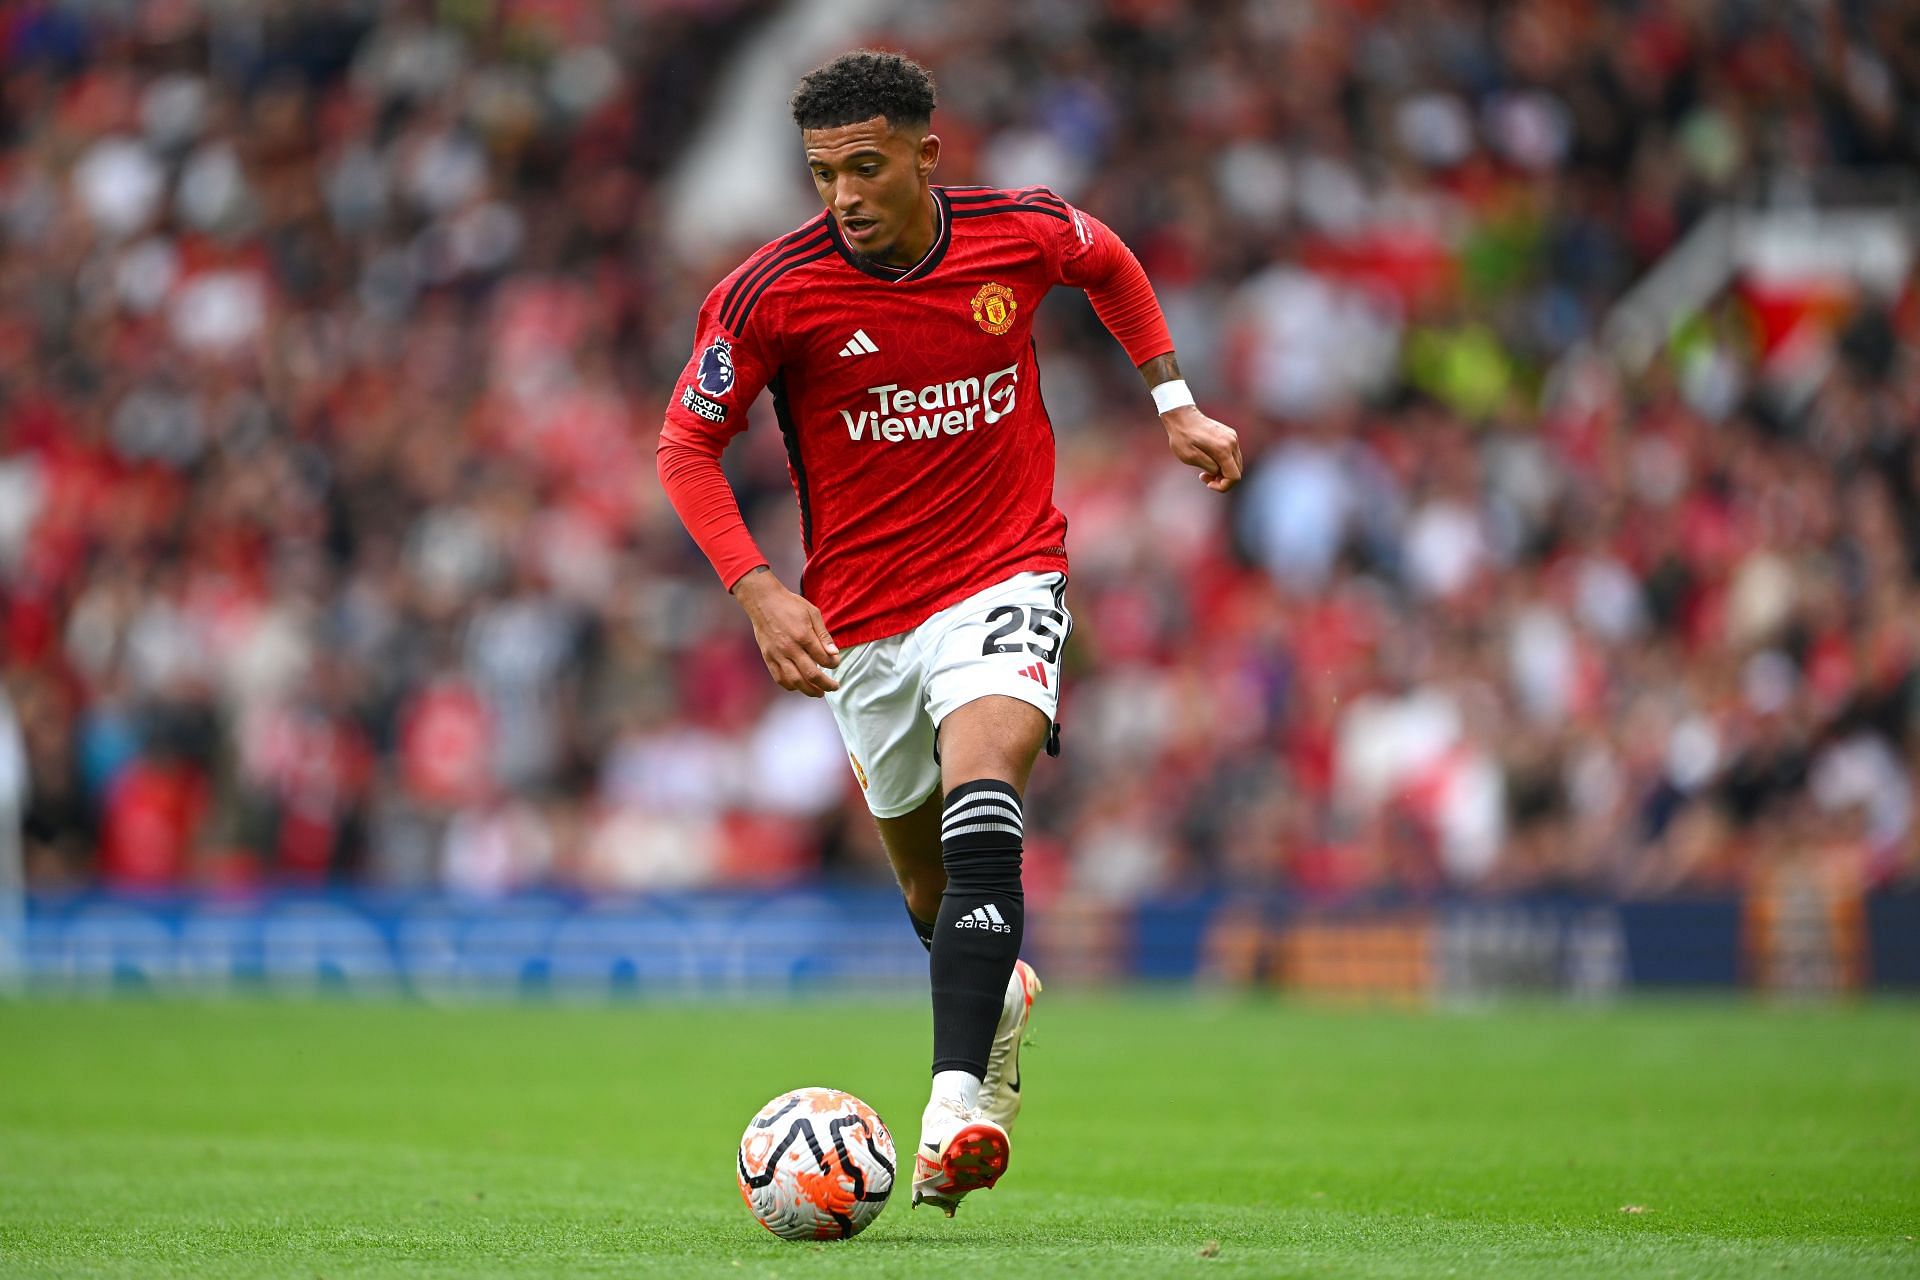 Jadon Sancho is likely to leave Old Trafford in January